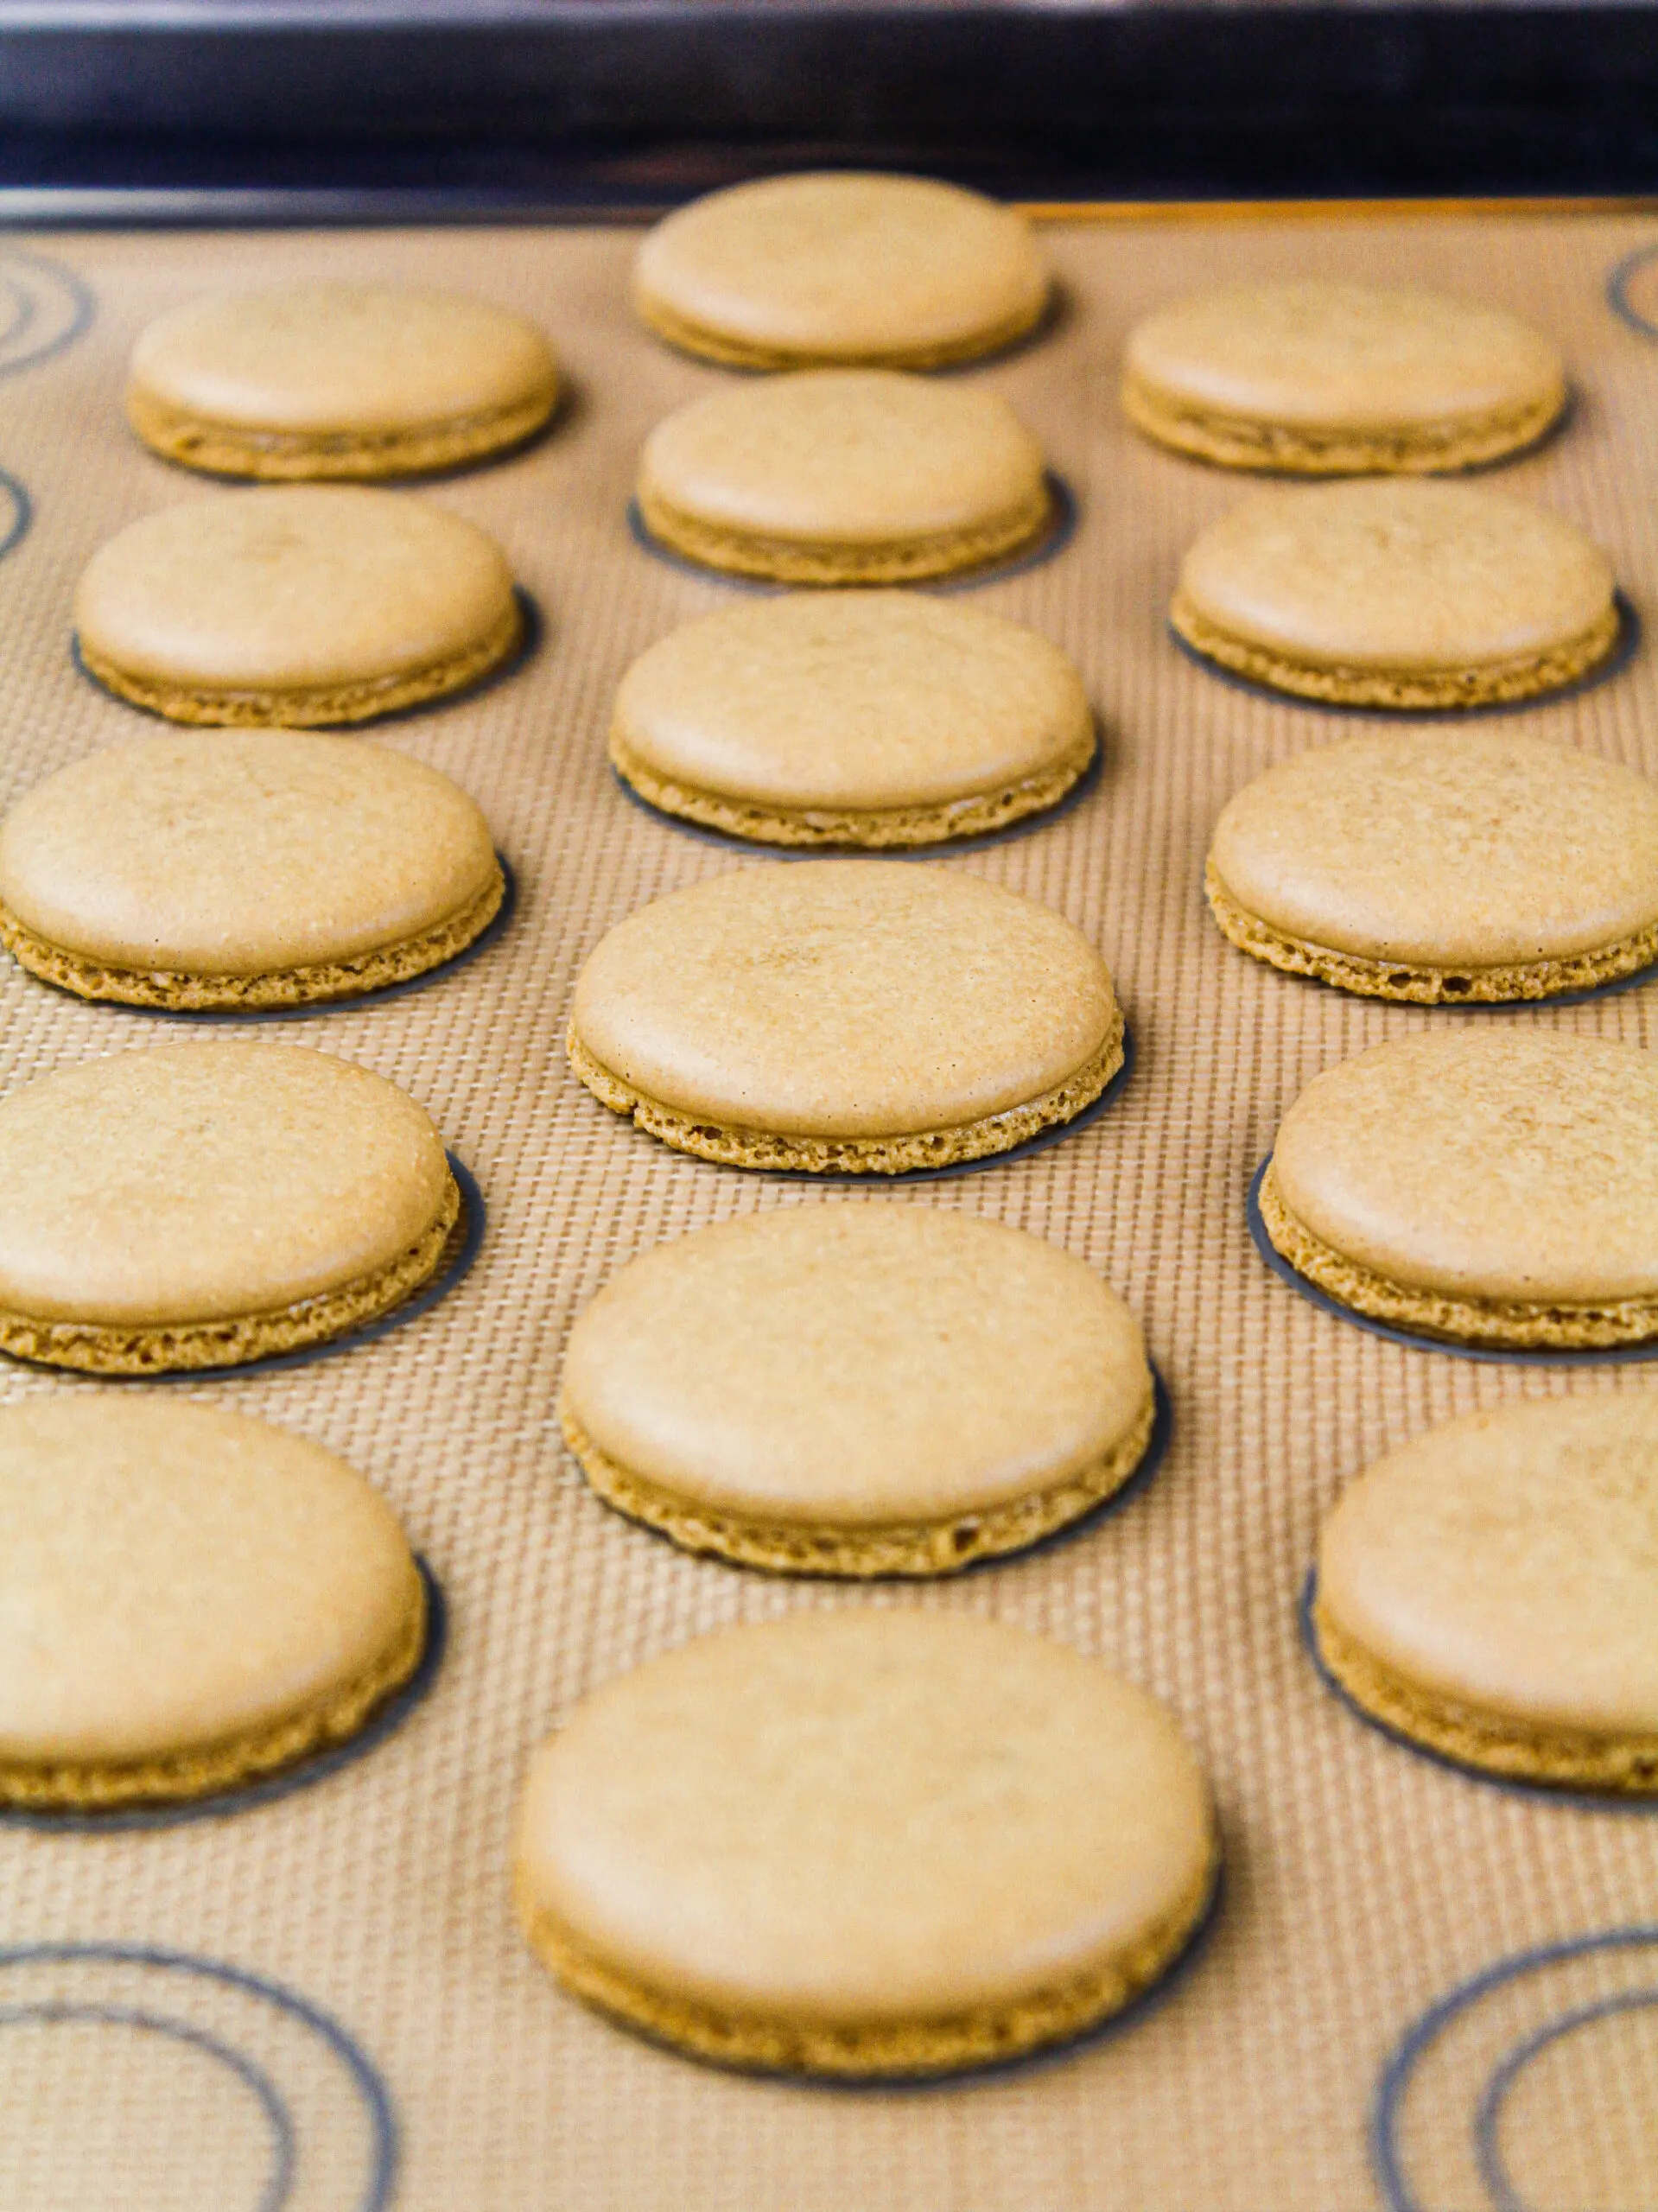 image of coffee flavored french macaron shells that have been baked and are cooling on. silpat mat